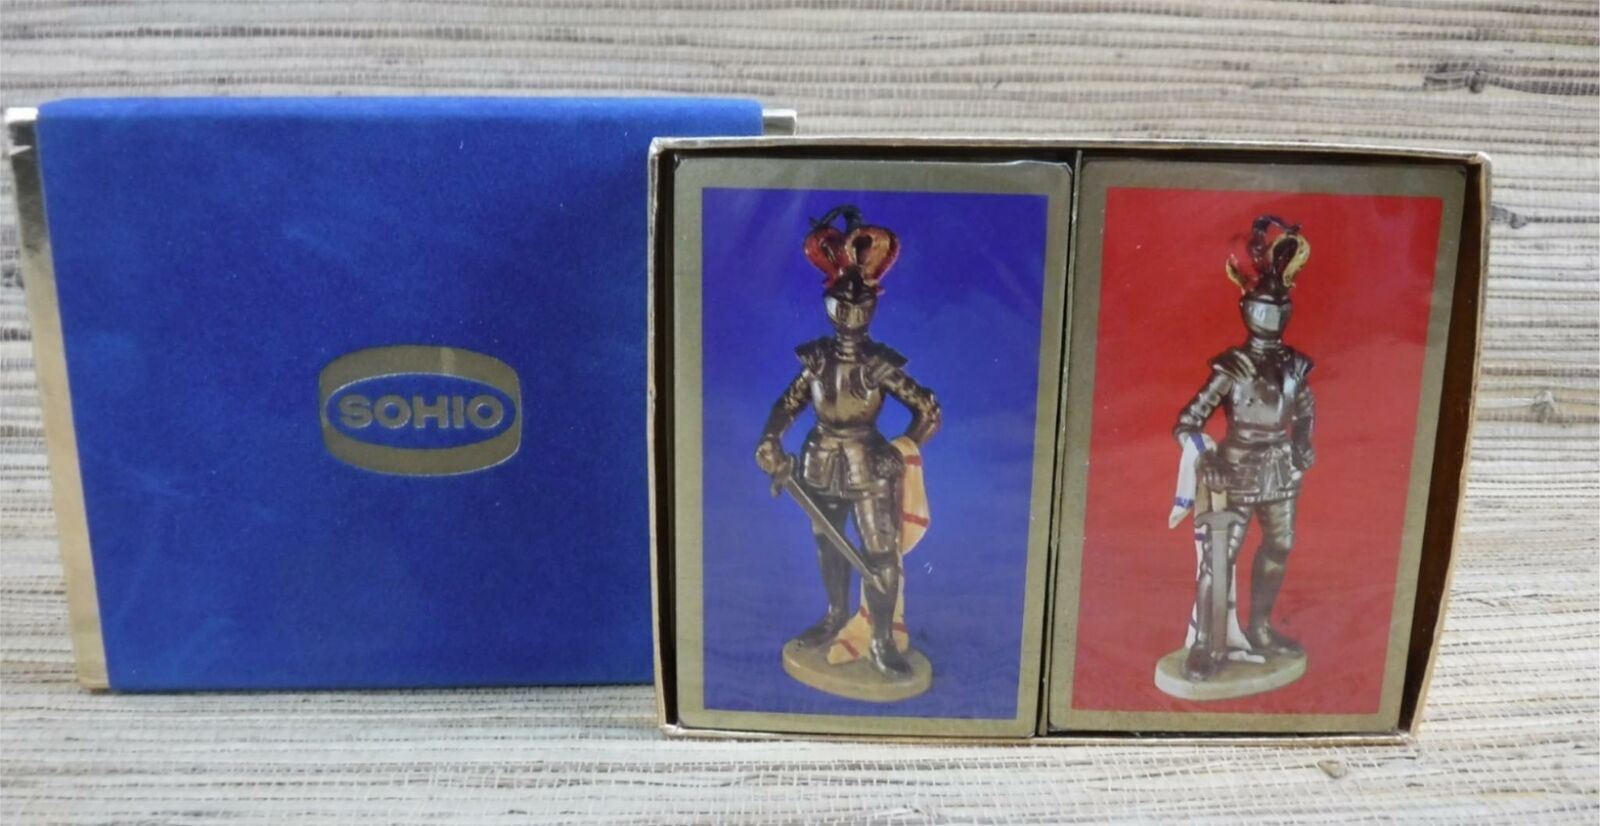 Vintage Sohio Gas Double Deck of Playing Cards Suit of Armor Blue Red  cb5